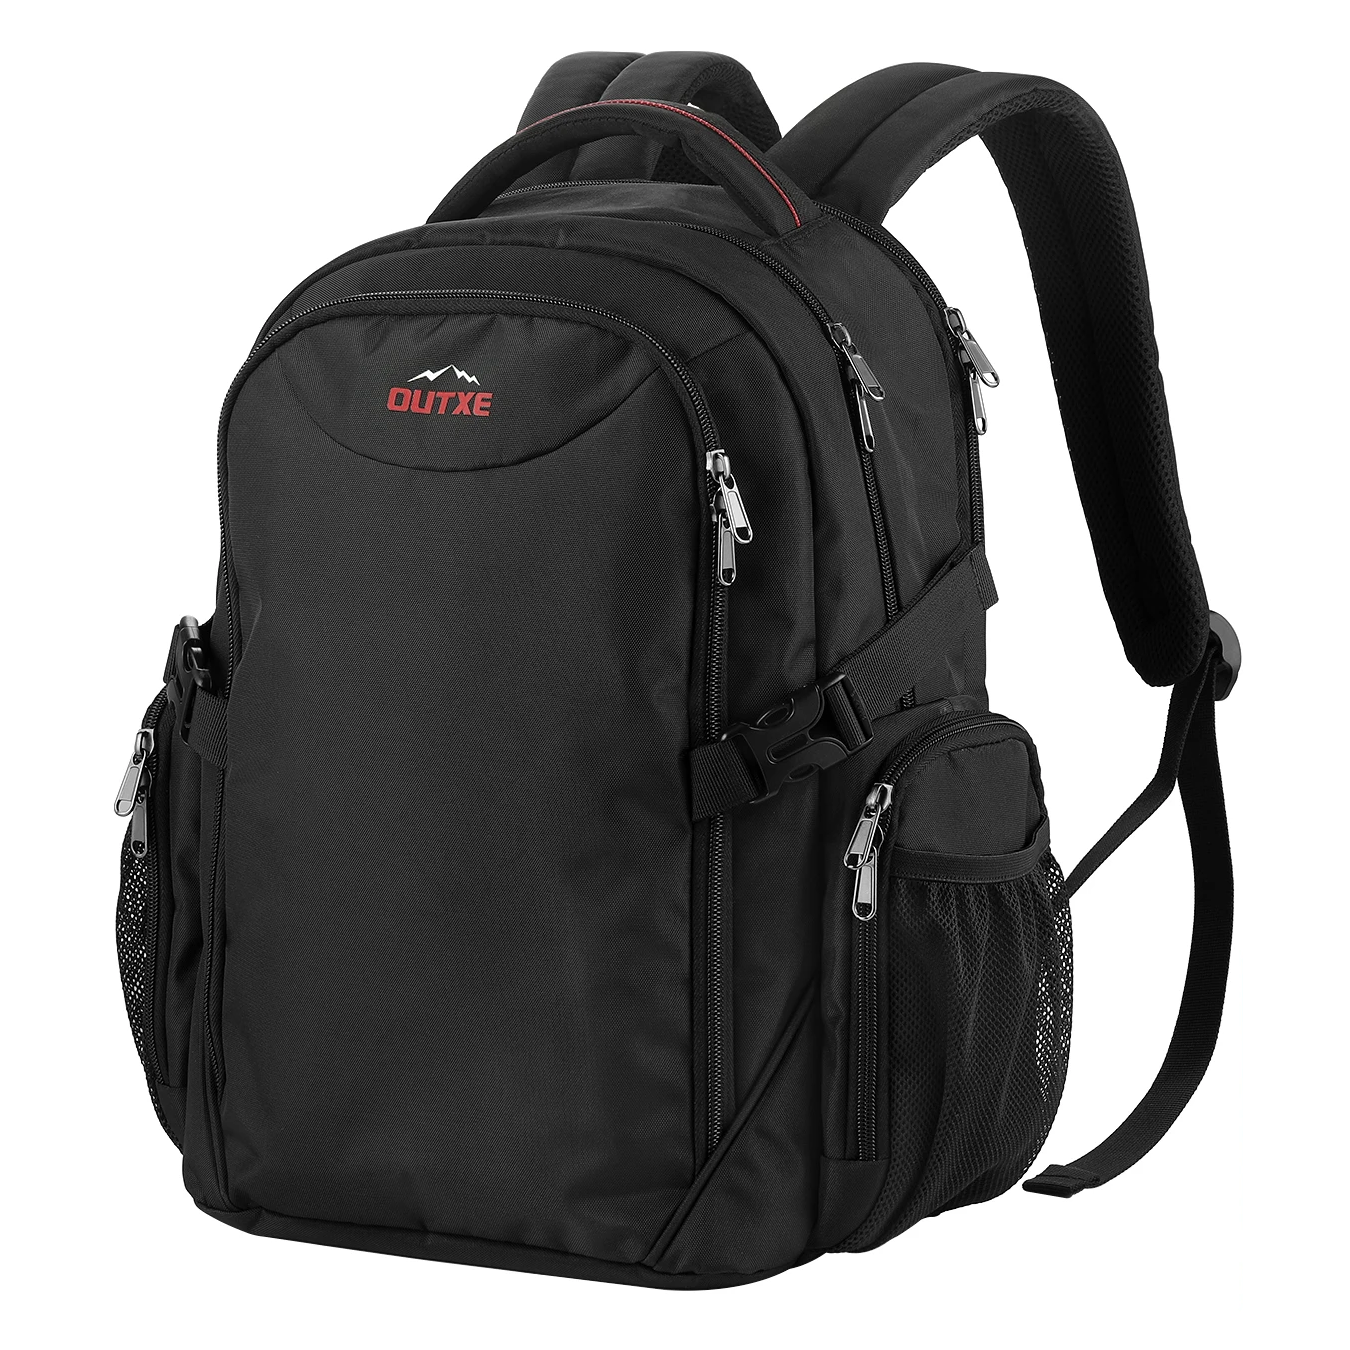 OUTXE Insulated Cooler Backpack